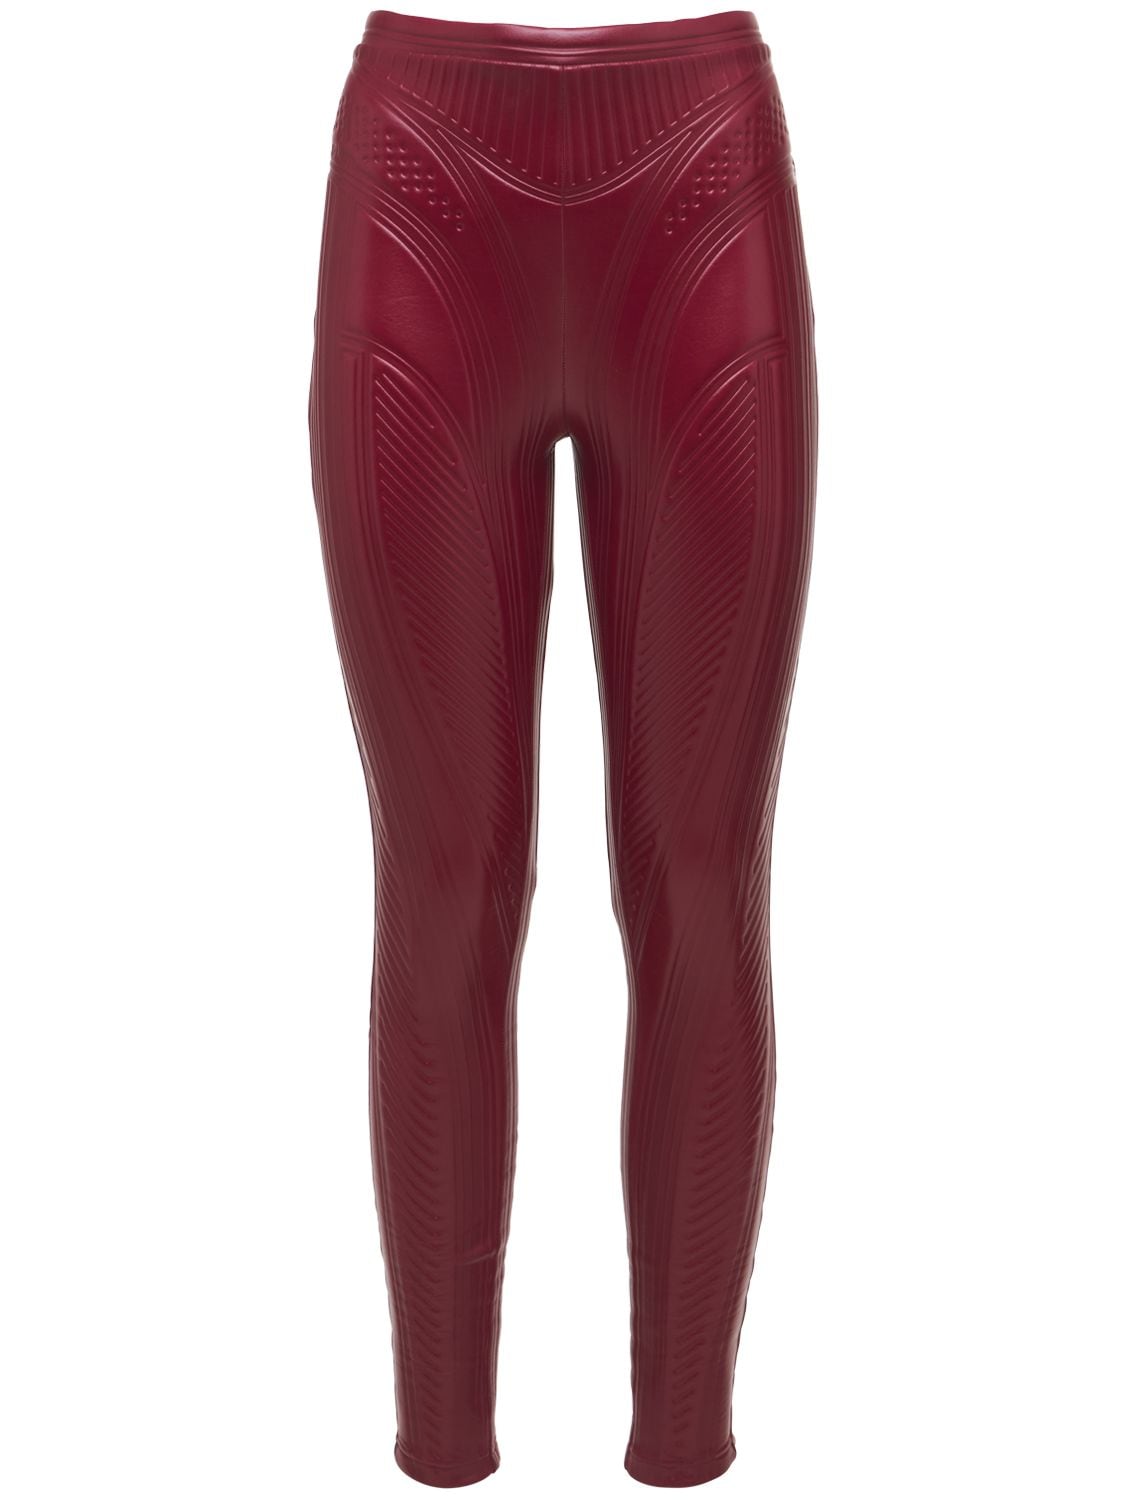 Embossed Shiny Stretch Jersey Leggings